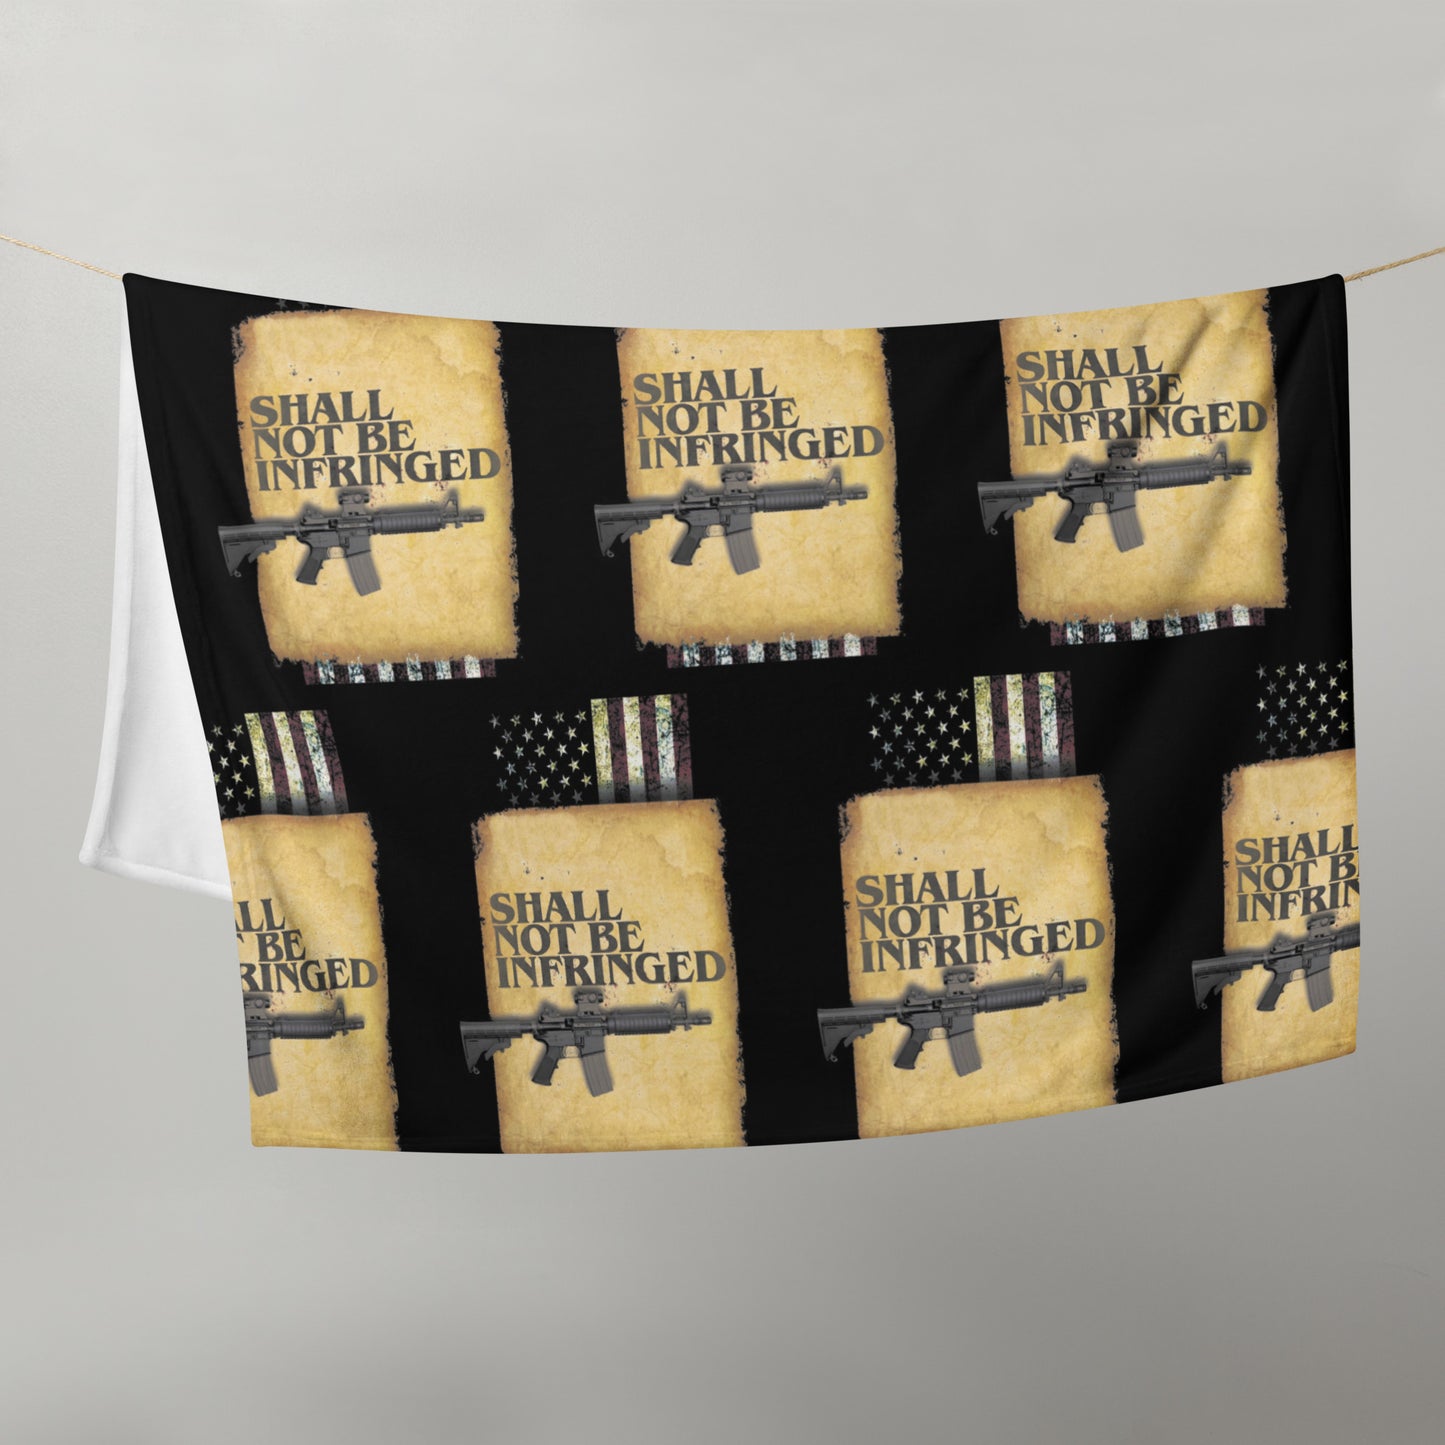 Shall Not Be Infringed-Parchment Throw Blanket